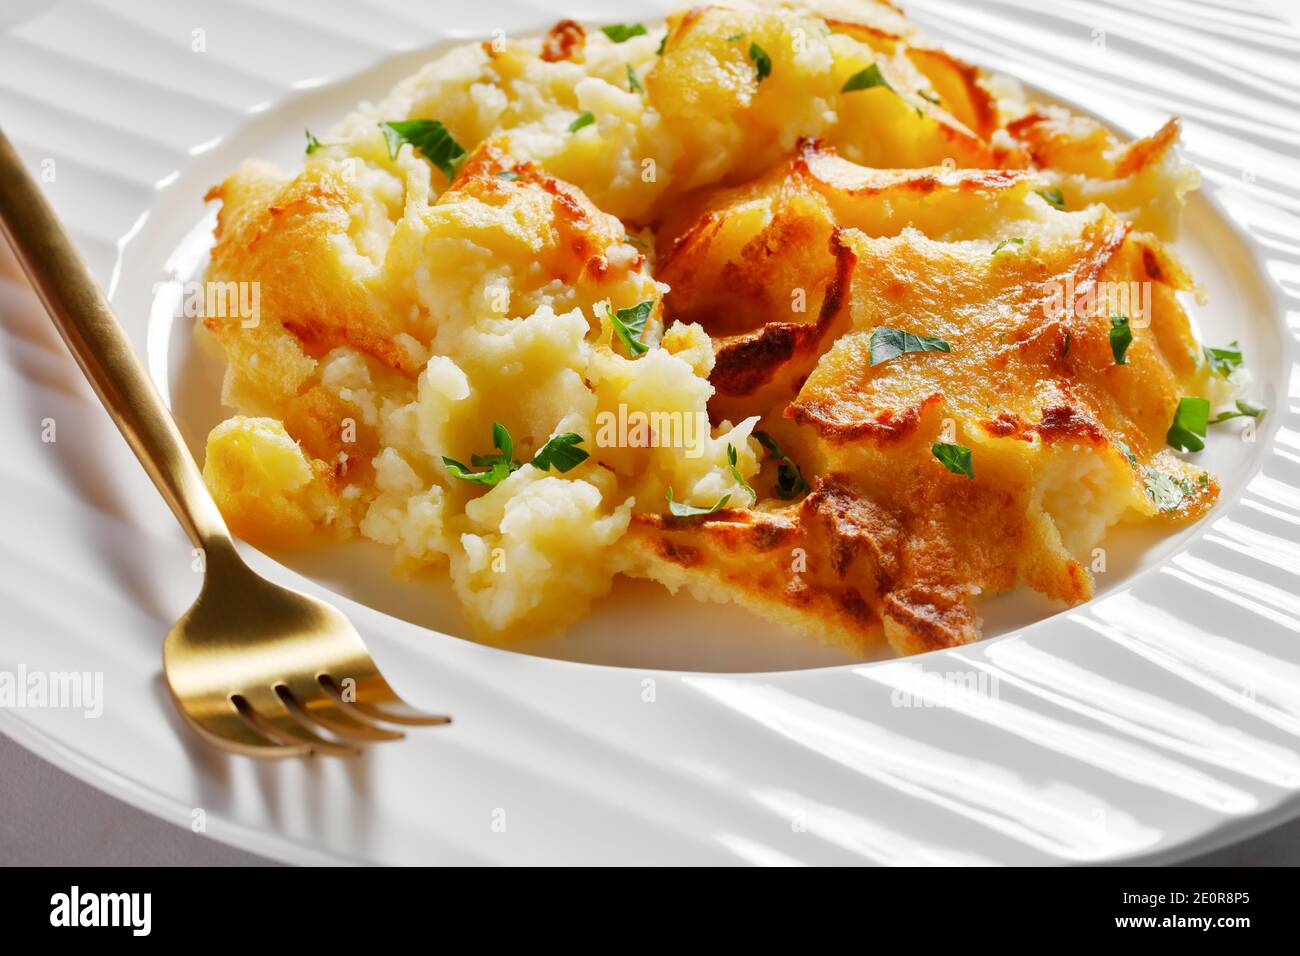 close-up of a portion of Garlic Parmesan Mashed Potato Casserole sprinkled with parsley on a white plate with golden fork, on a marble table, horizont Stock Photo